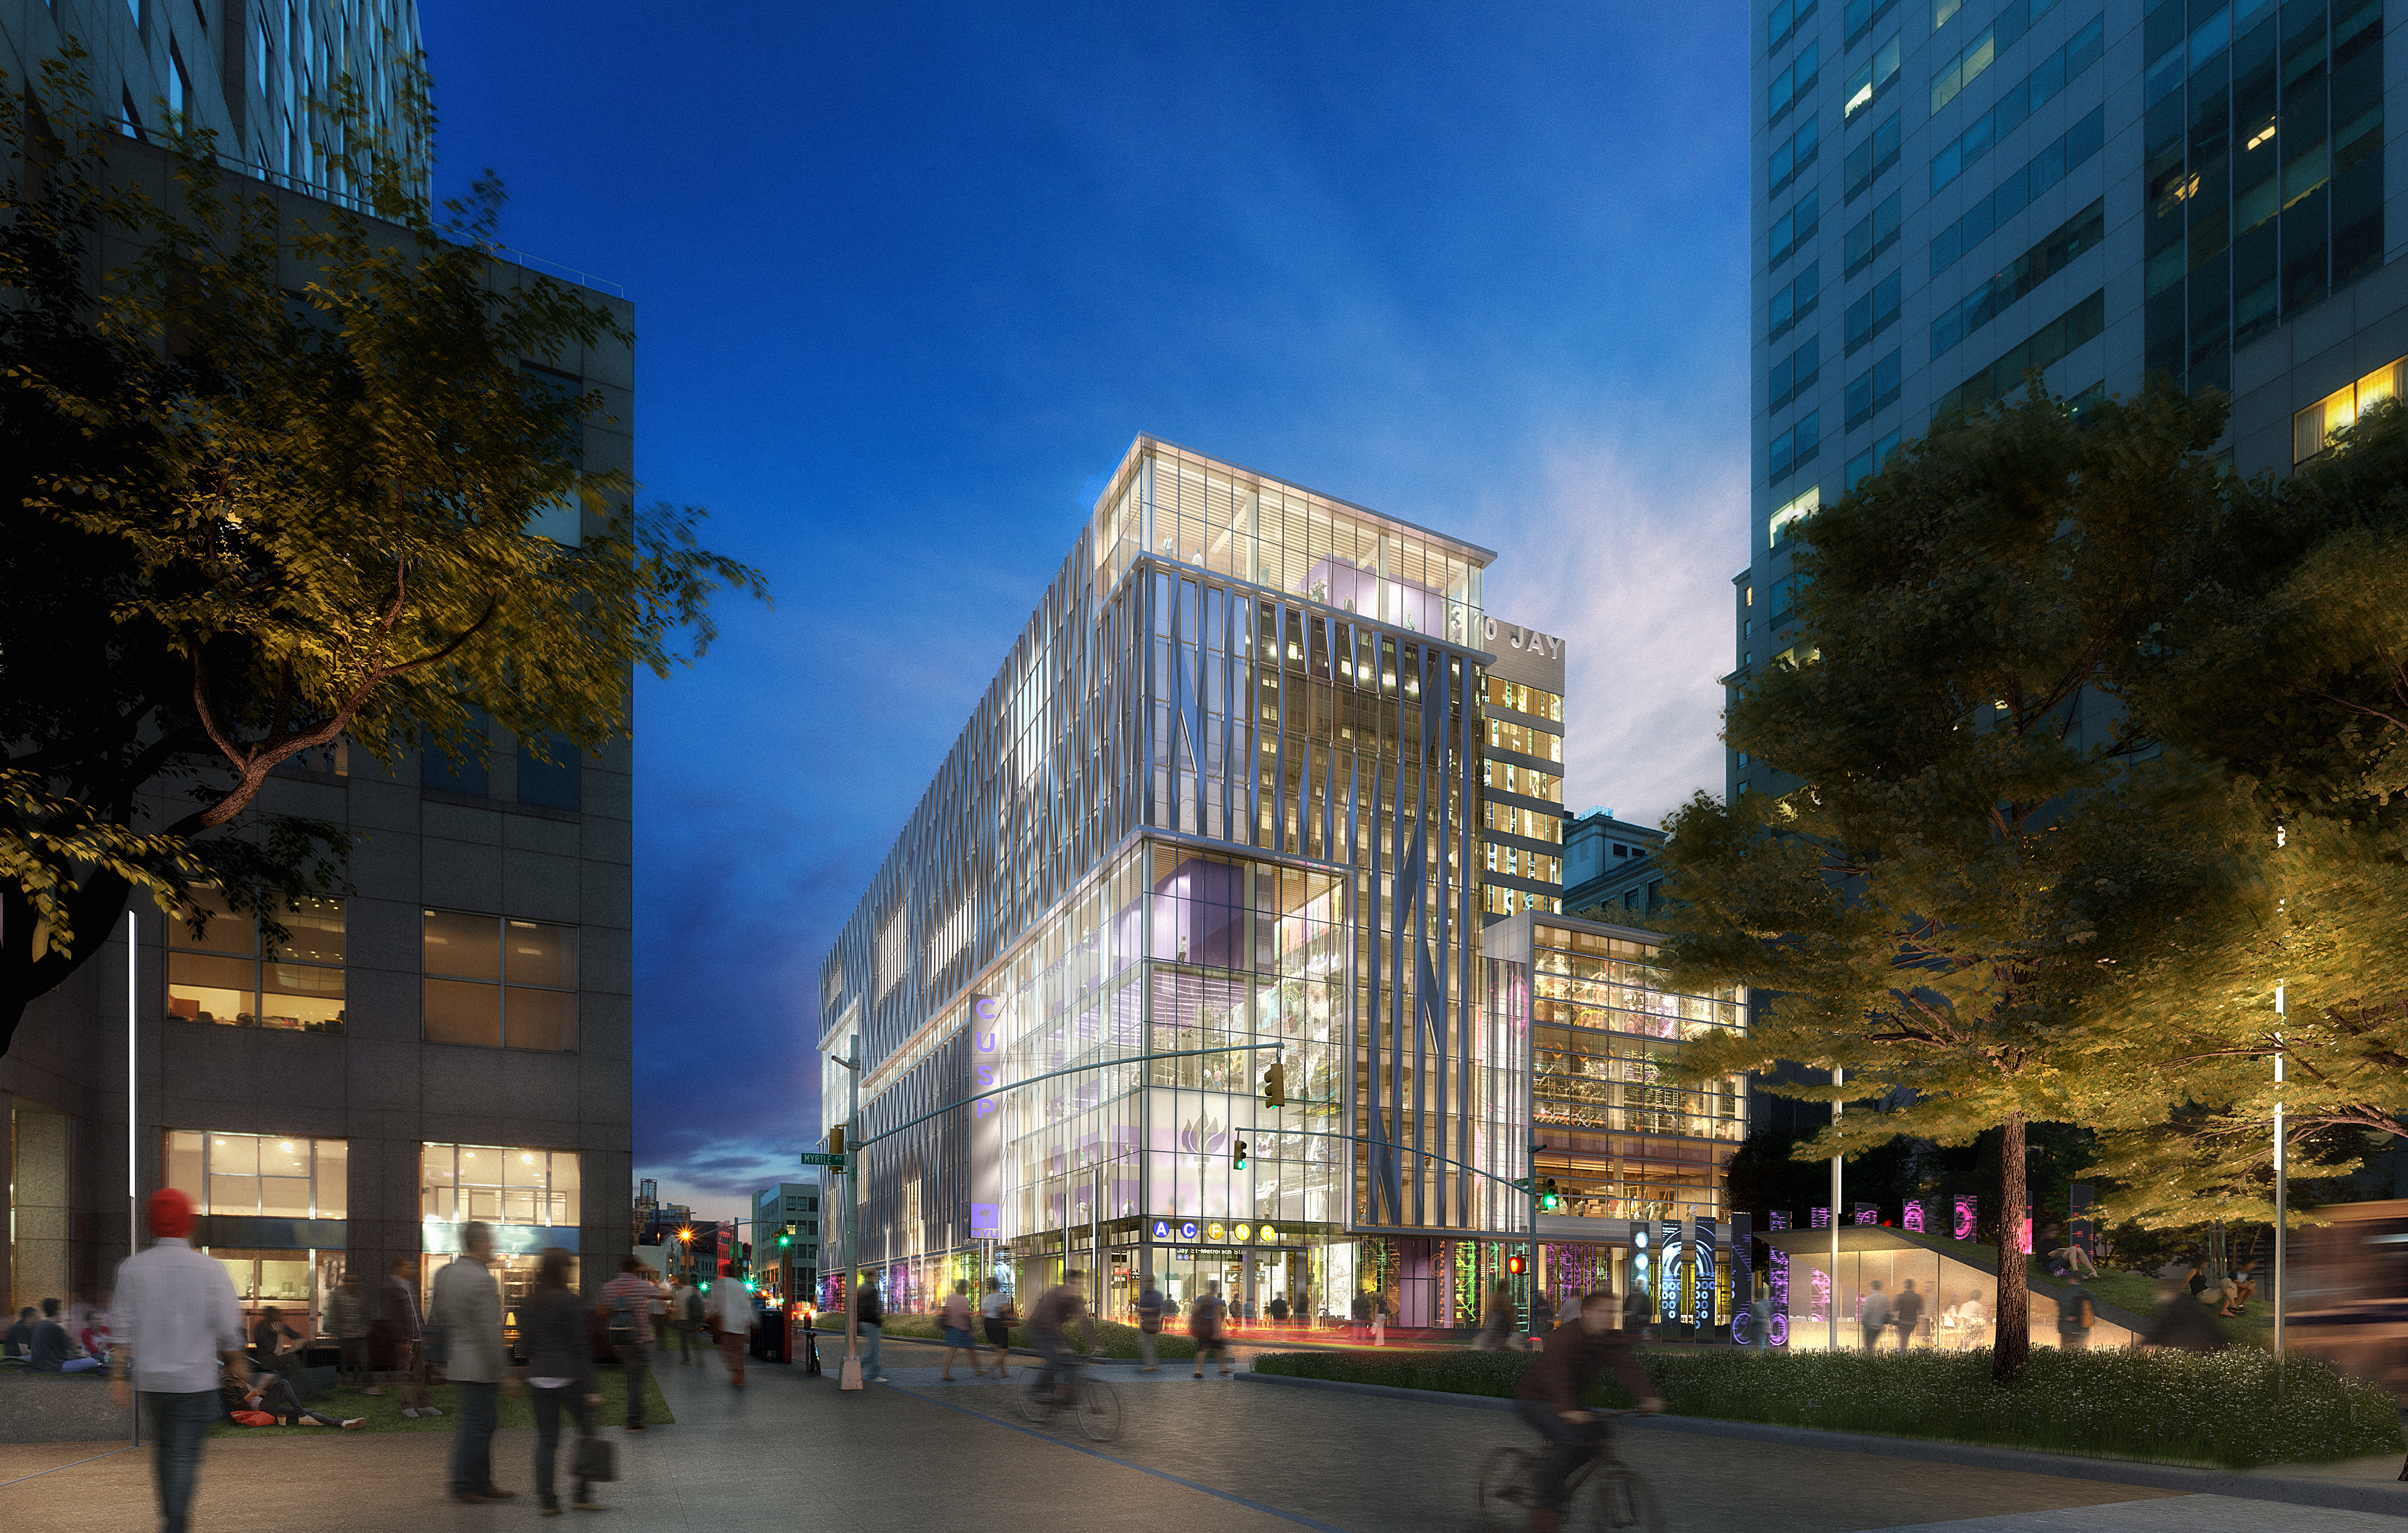 NYU Plans To Invest $500M To Expand Downtown Brooklyn's Hi-Tech Campuses